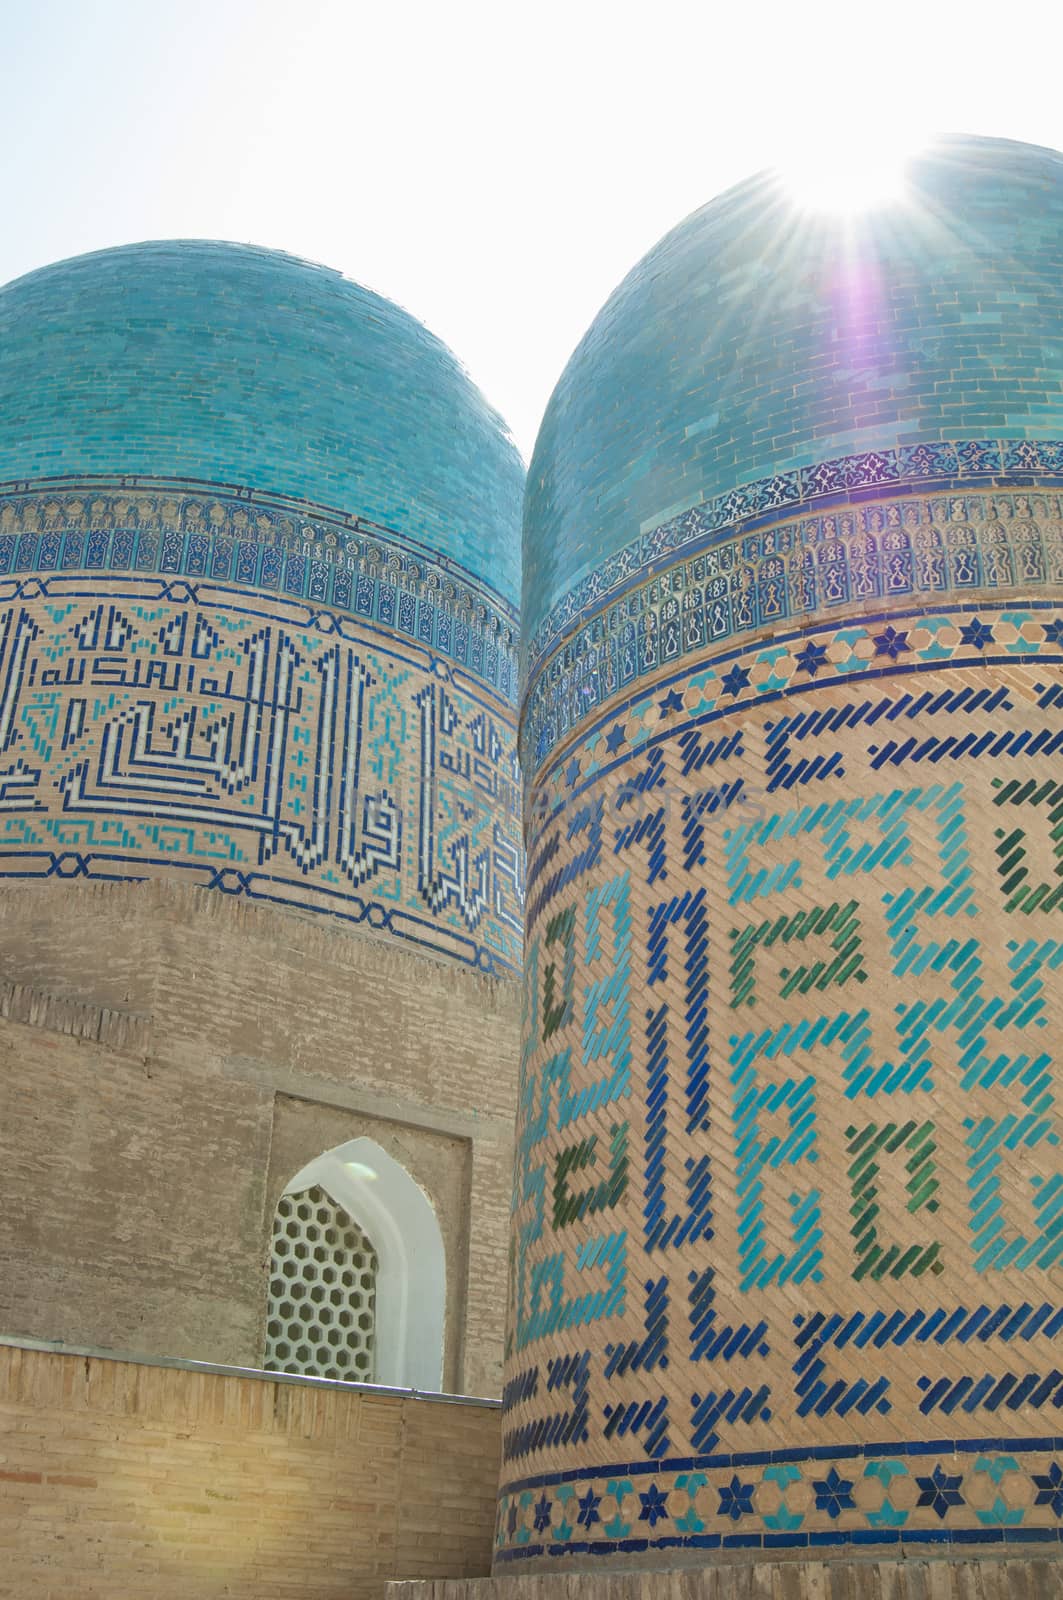 the architecture of ancient Samarkand by A_Karim